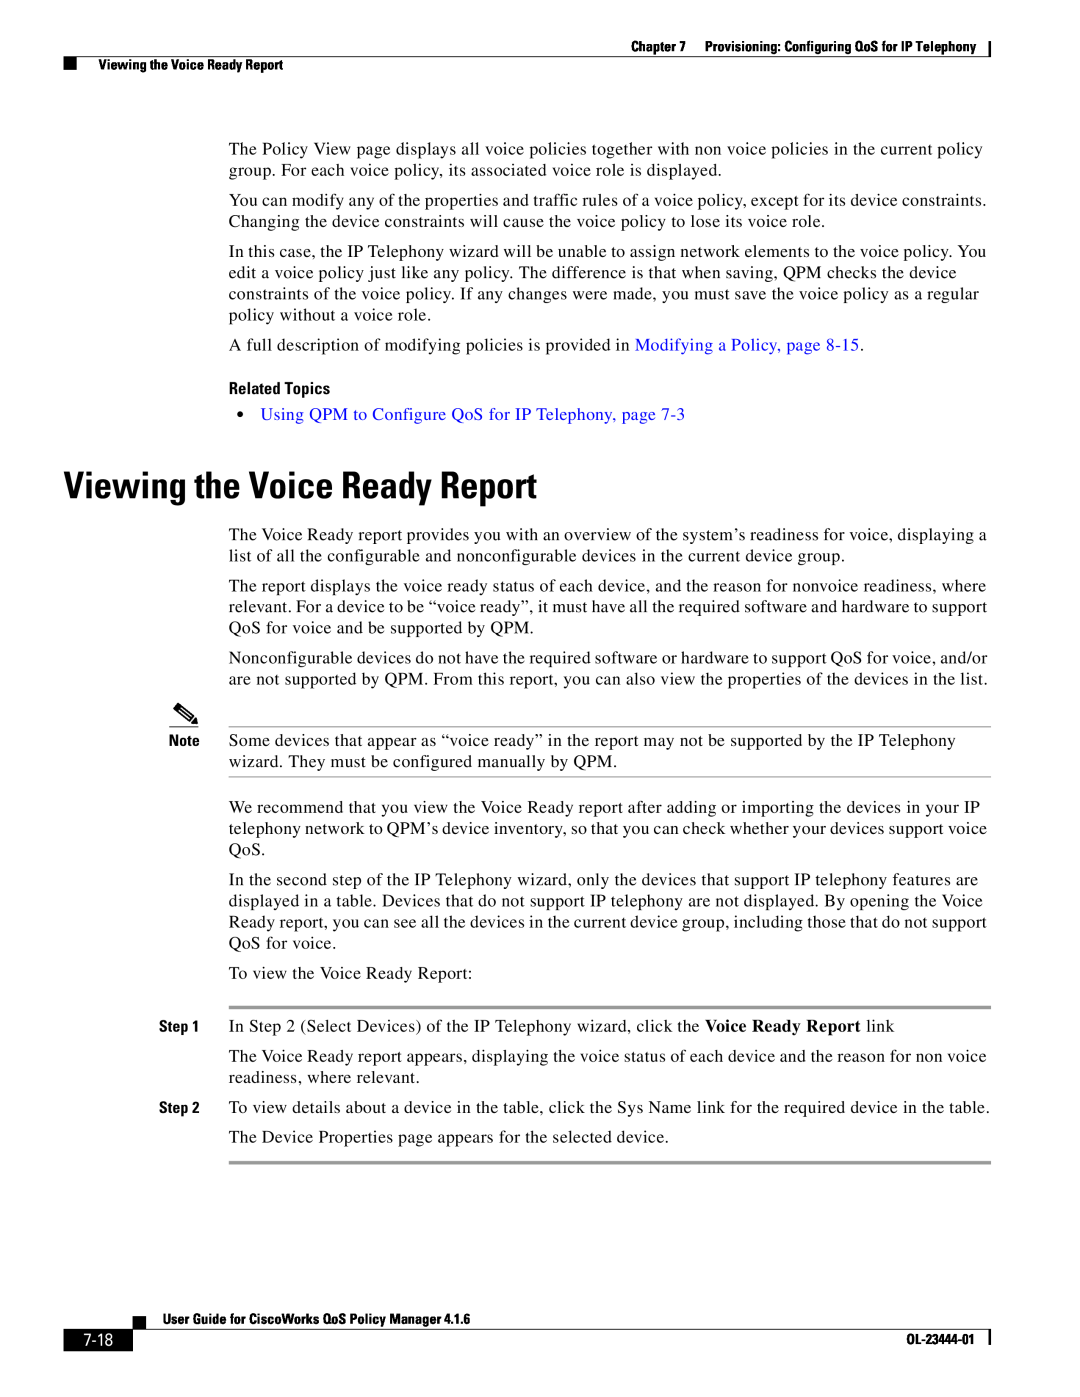 Cisco Systems 416 Viewing the Voice Ready Report, 7-18, Related Topics, Using QPM to Configure QoS for IP Telephony, page 